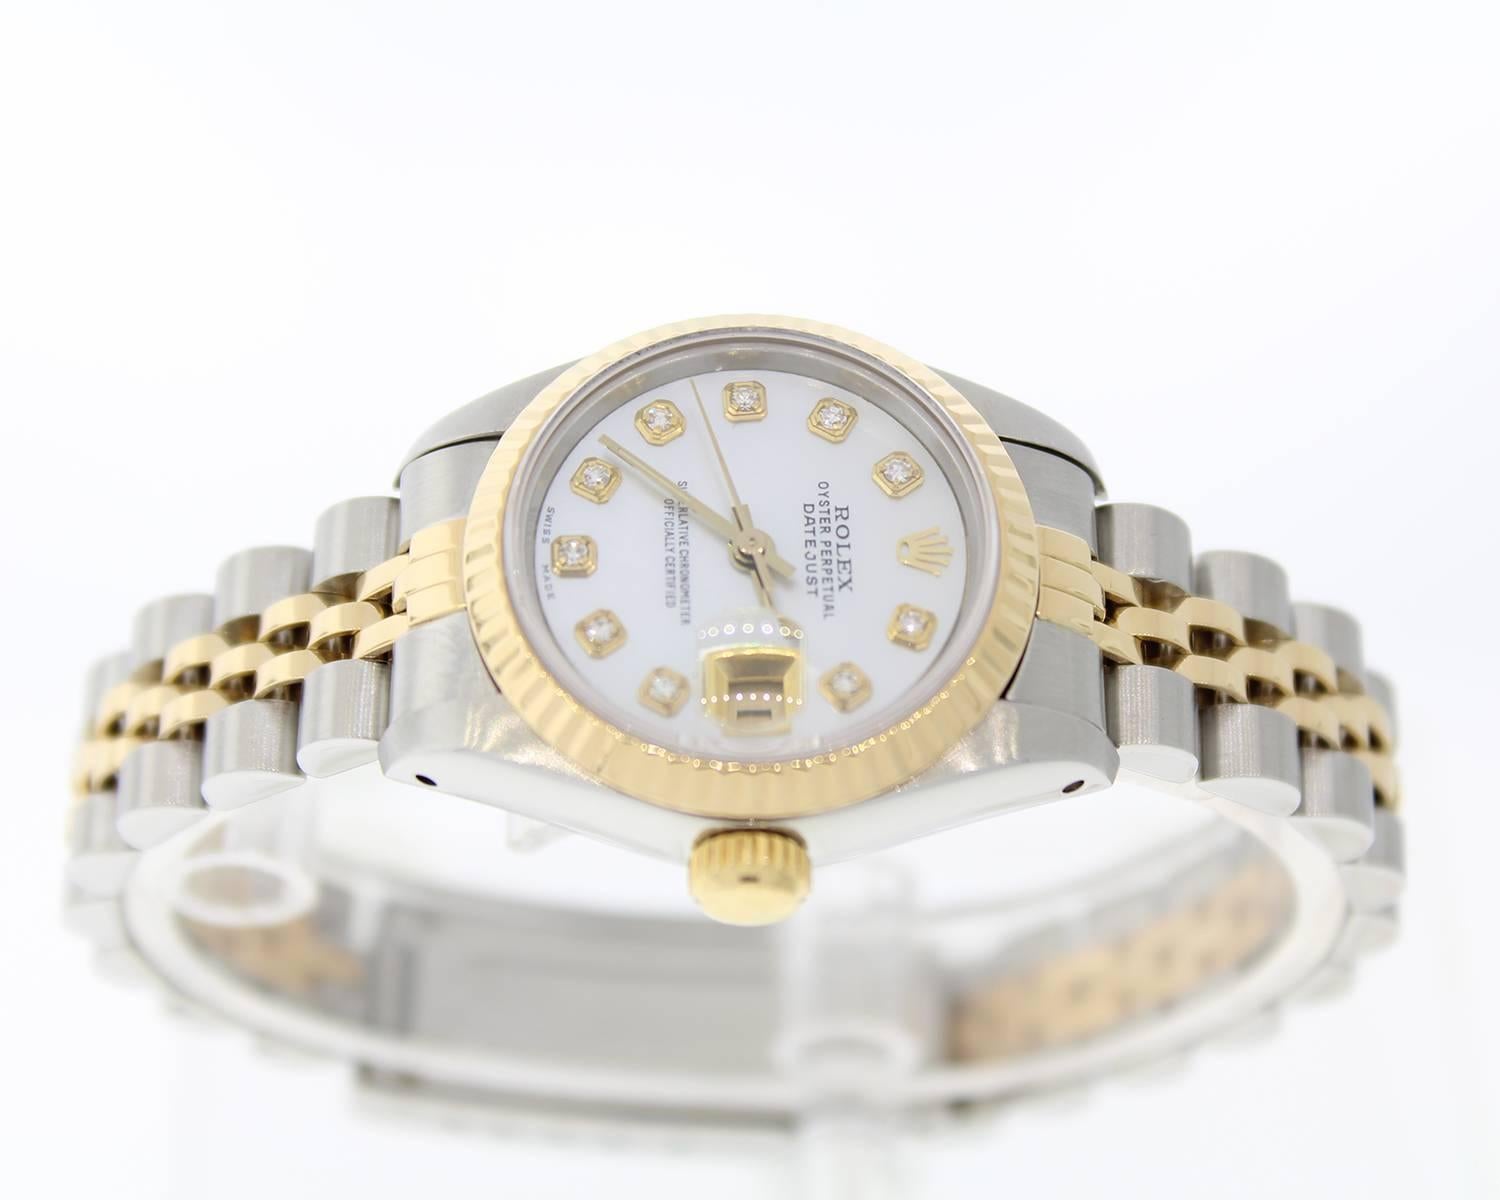 Brand Name: Rolex
Style Number: 30793
Style Name: Datejust
Color Name (Dial): Custom MOP Diamond Dial
Country of Manufacture: Switzerland
Gender: Womens
Strap Material: Stainless Steel/18K Yellow Gold
Case Metal: Stainless Steel/18K Yellow